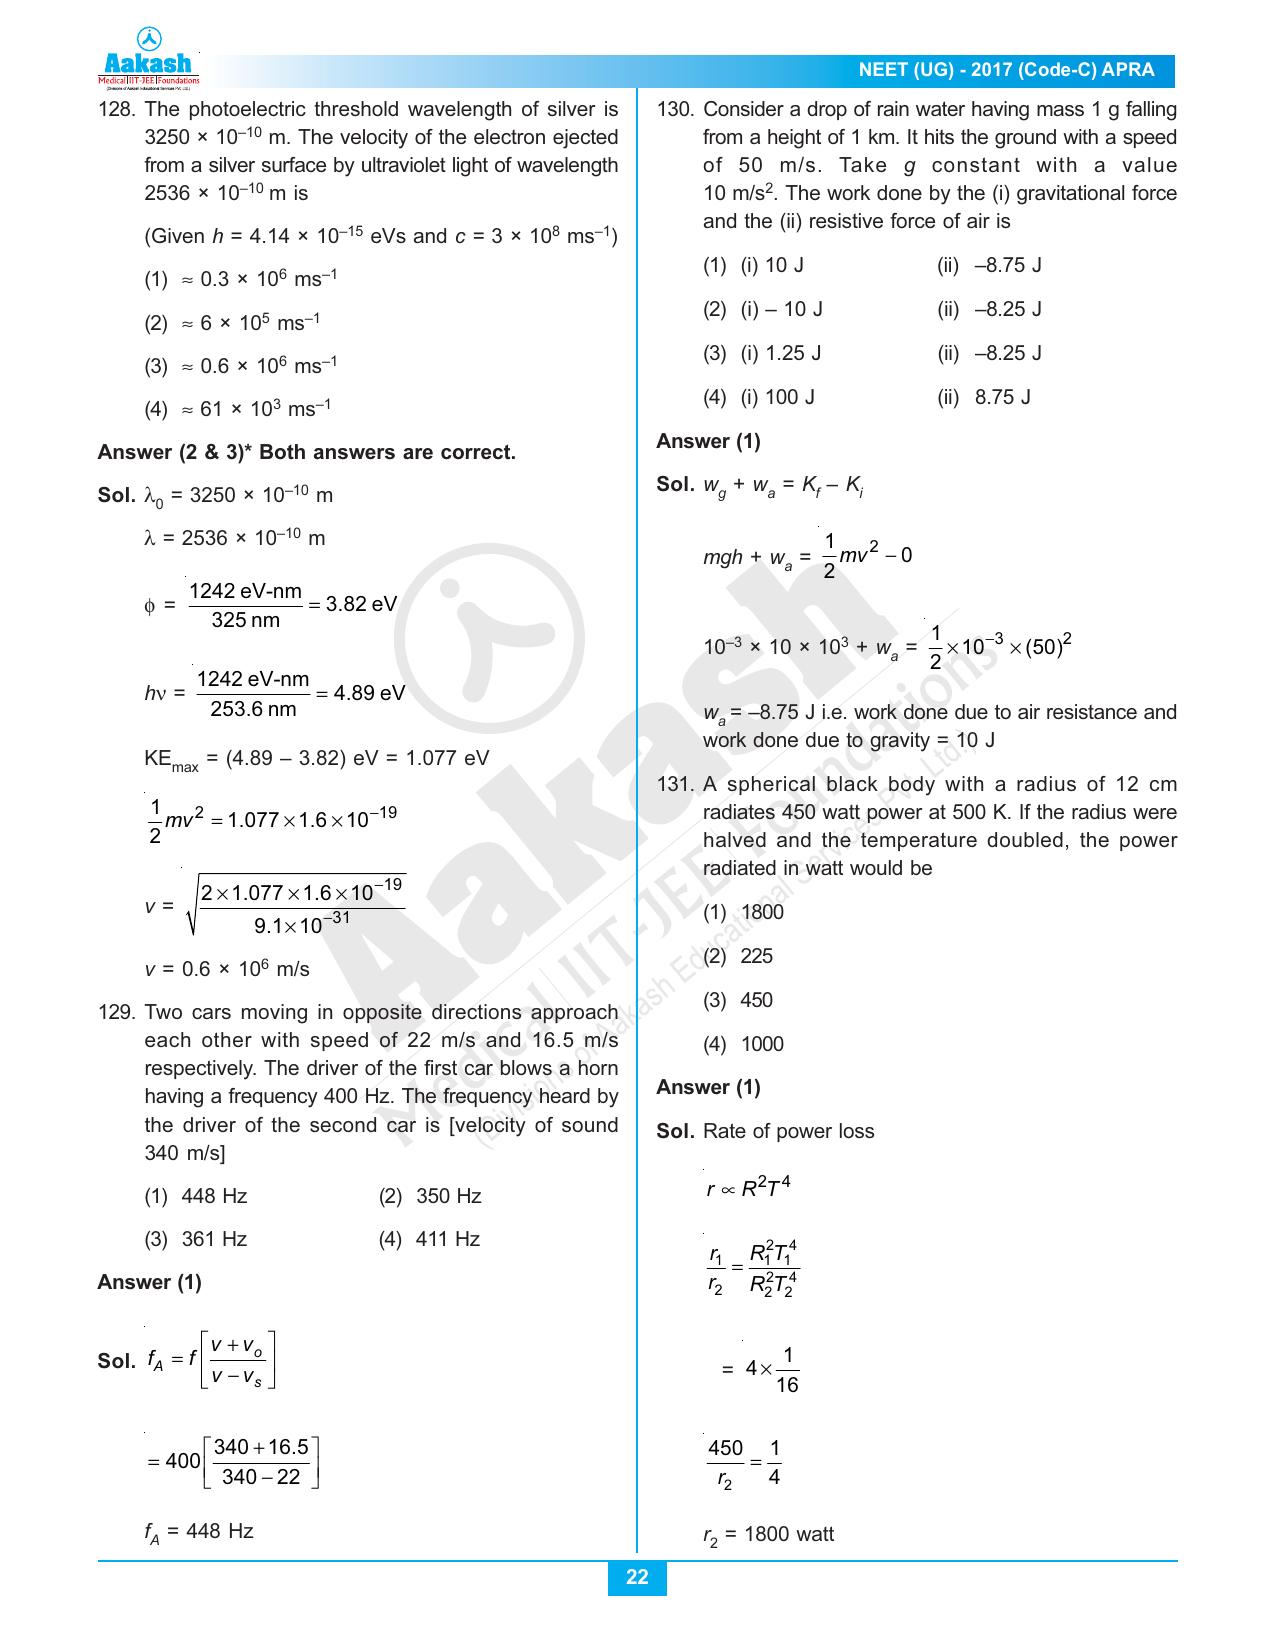  NEET Code C 2017 Answer & Solutions - Page 22